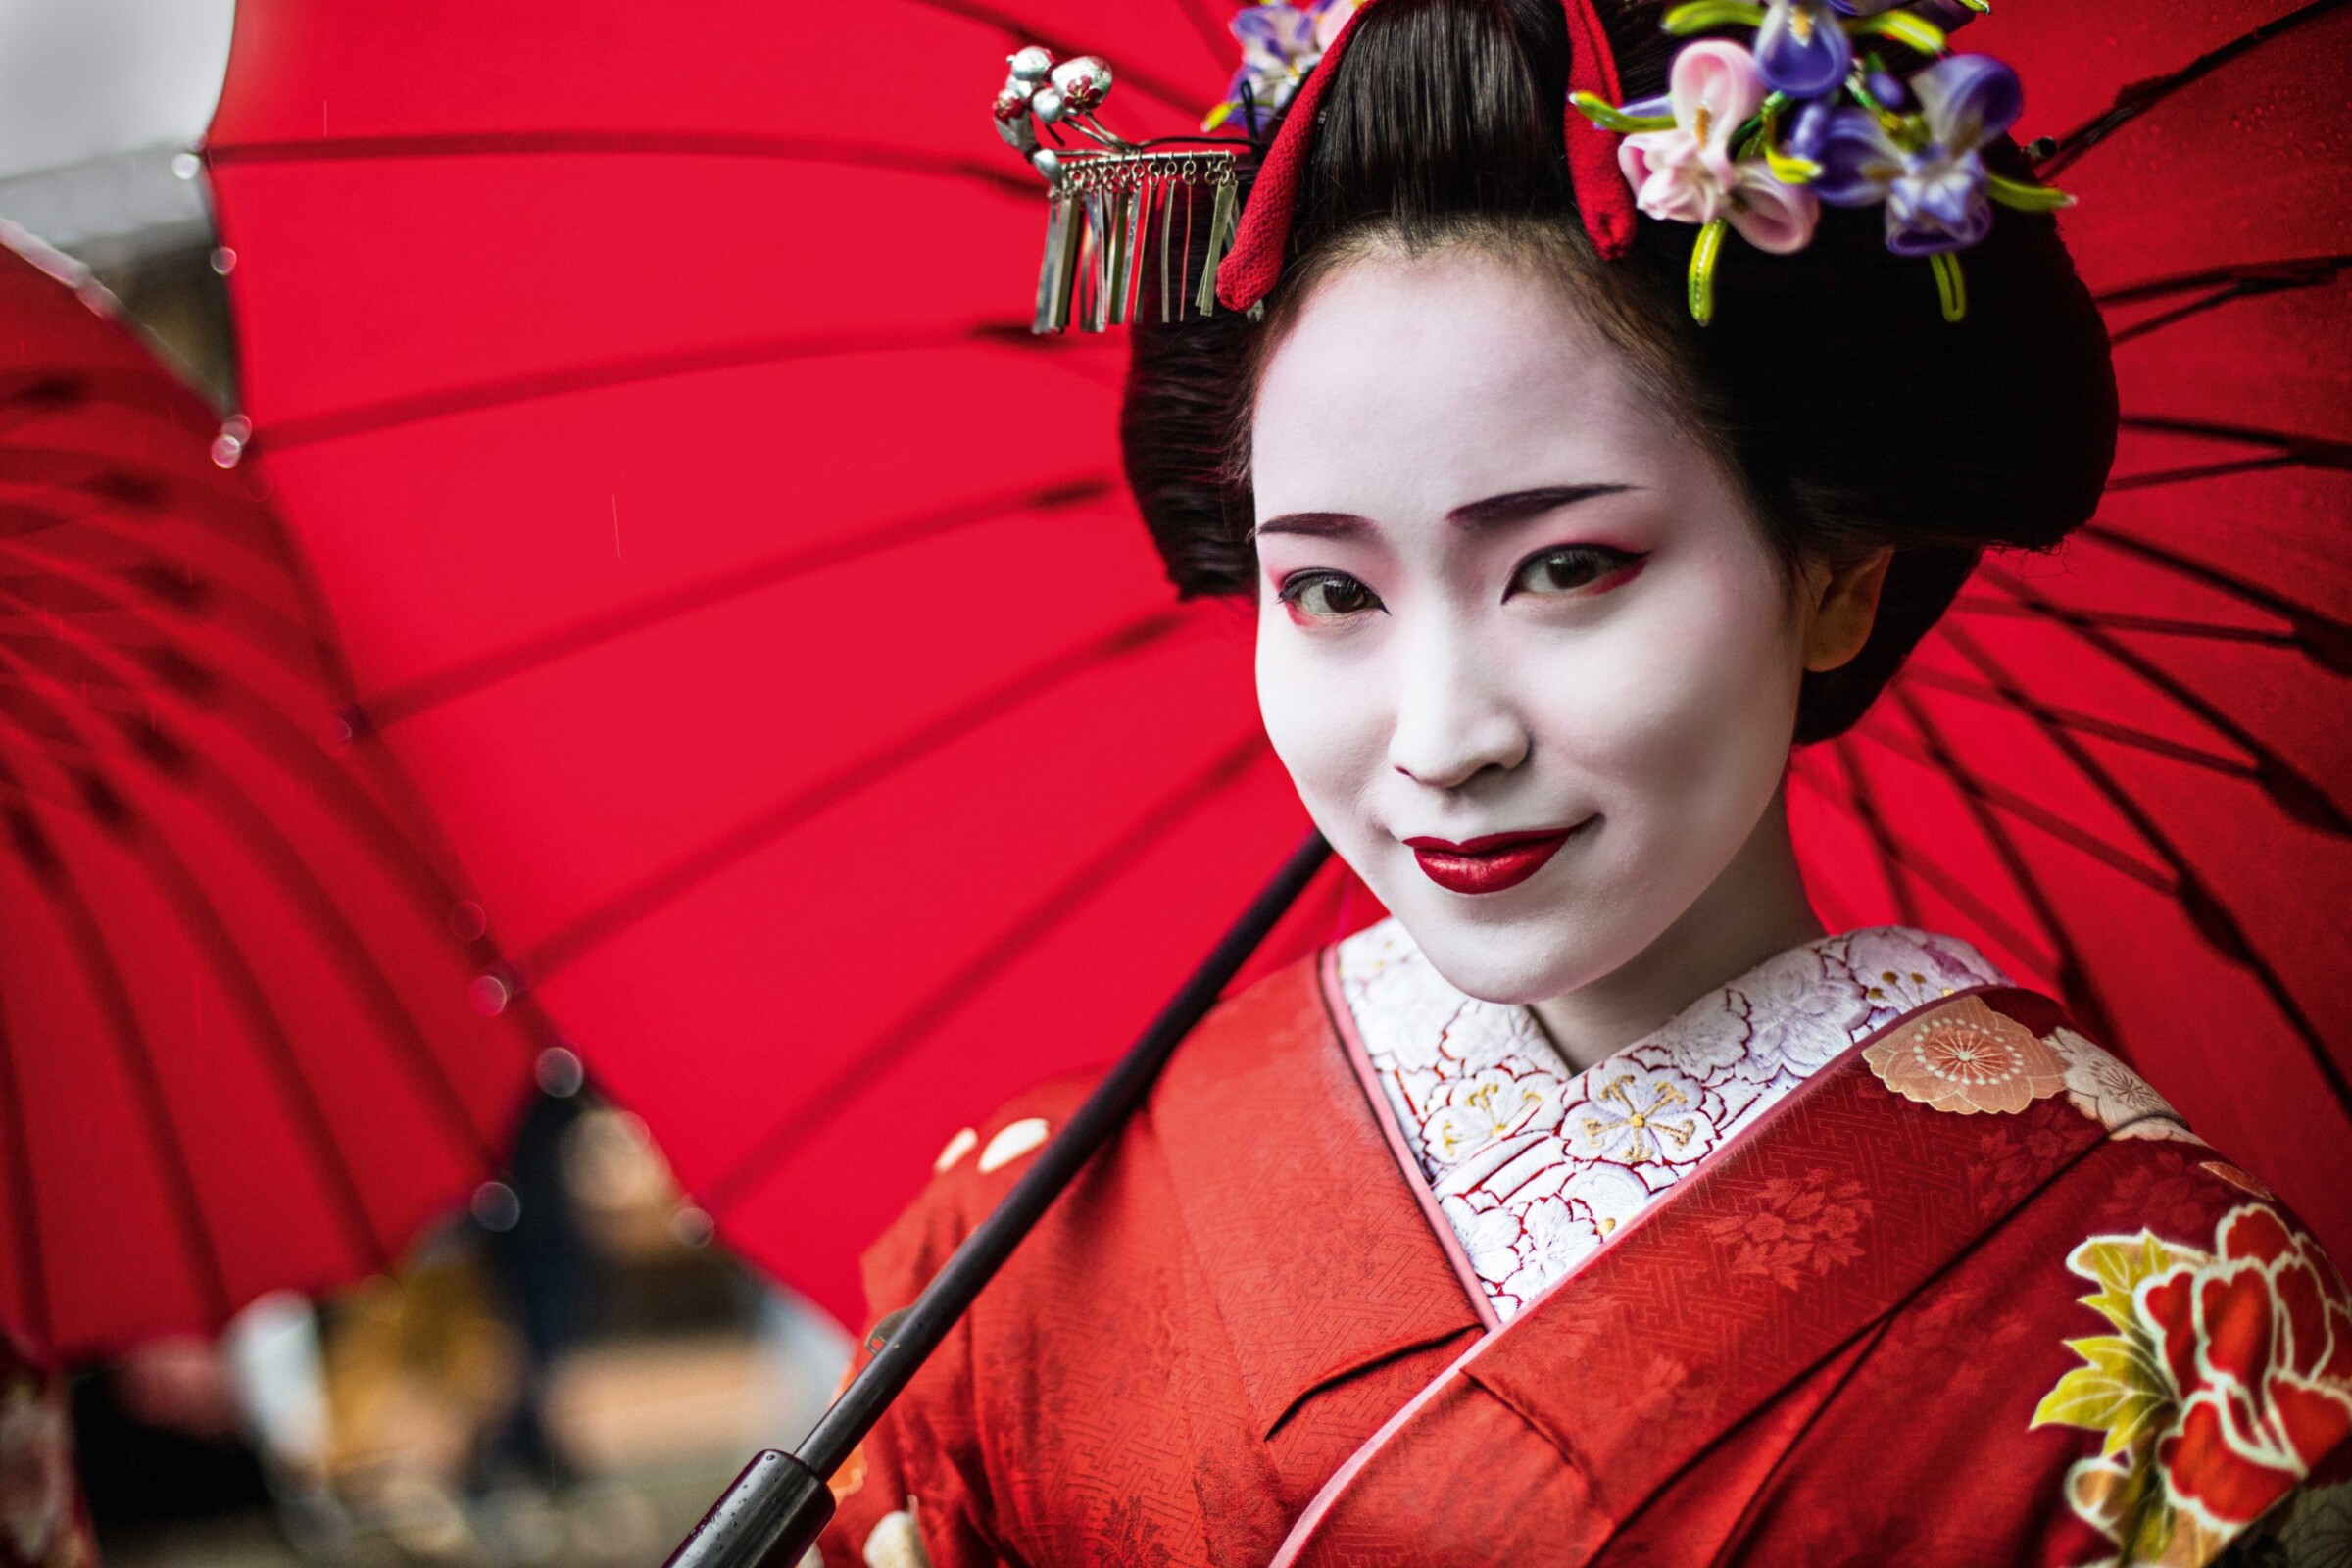 The mysterious world of the Geisha. Fine artist or sex worker?